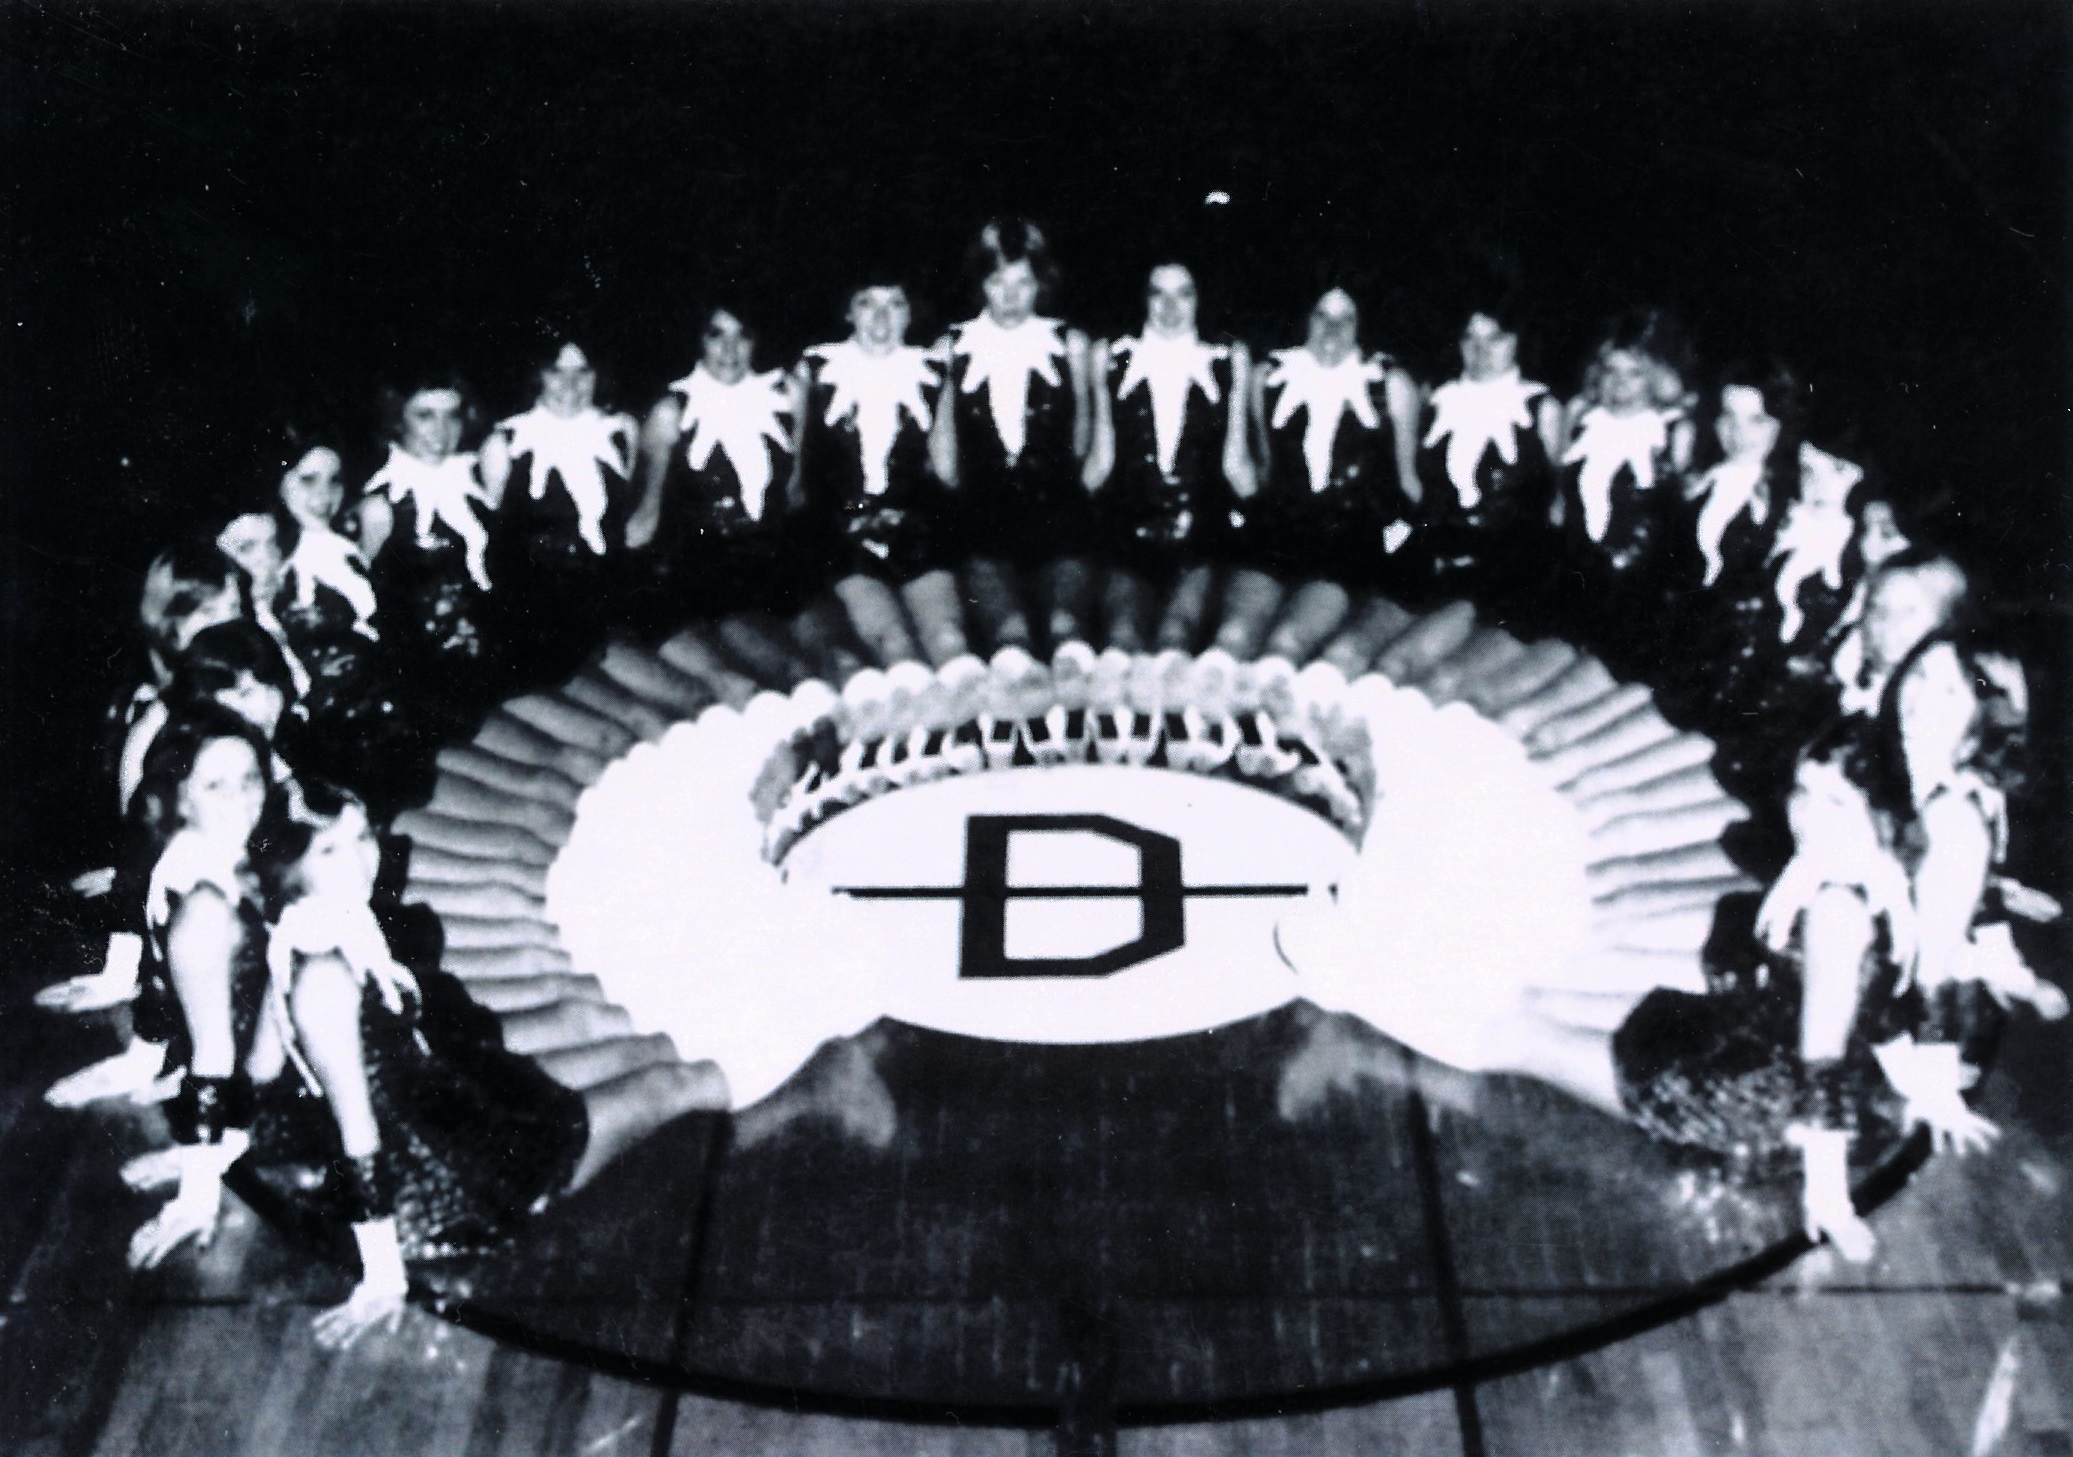 Dixie [Academy/High?] girls in costume and in a circular formation